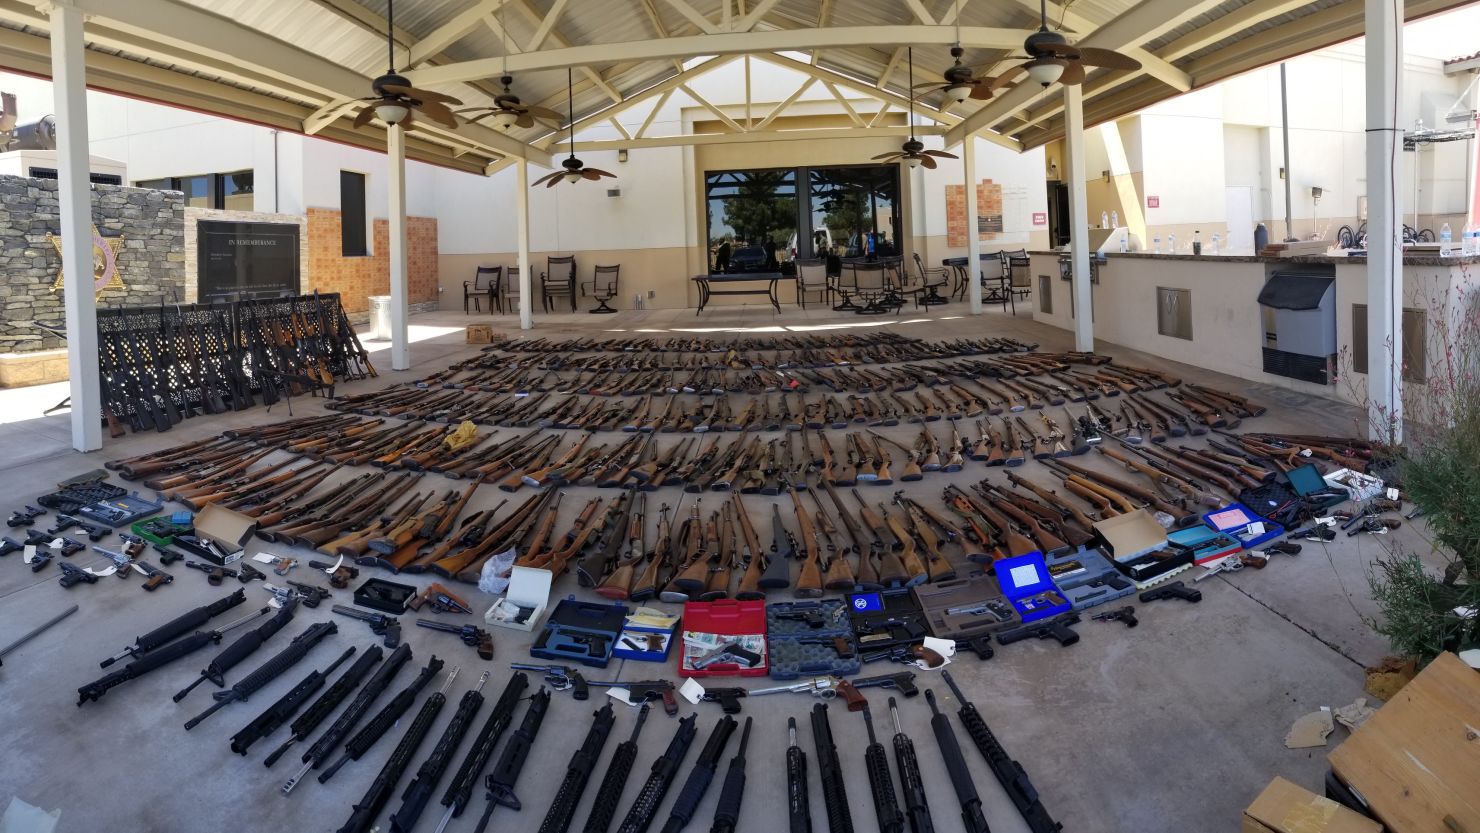 Officials confiscated guns, ammunition, computers and other evidence.